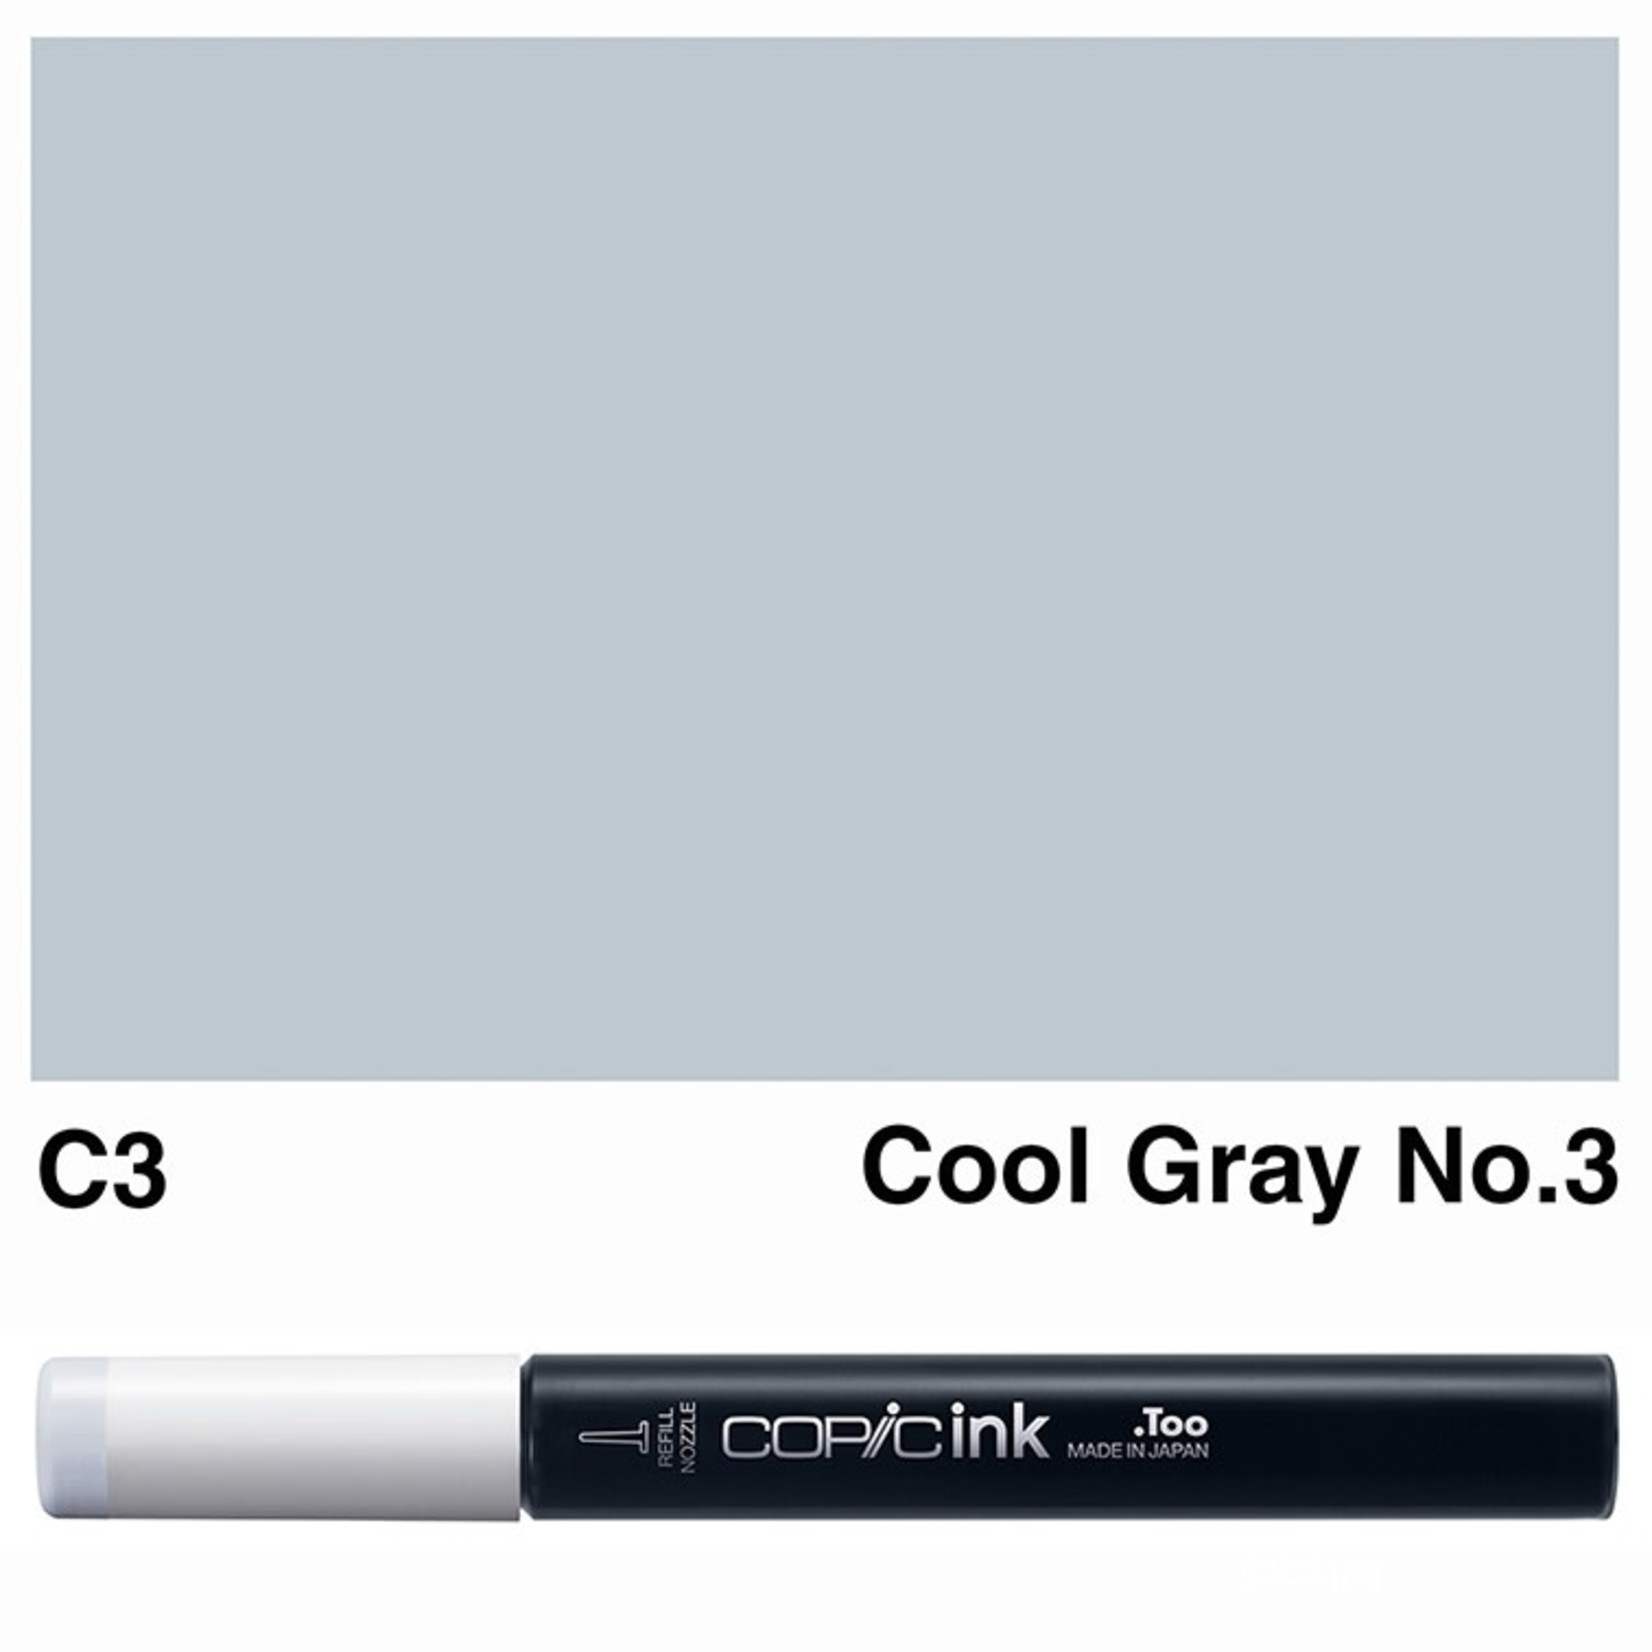 Copic Copic Various Ink C3 Cool Grey No. 3